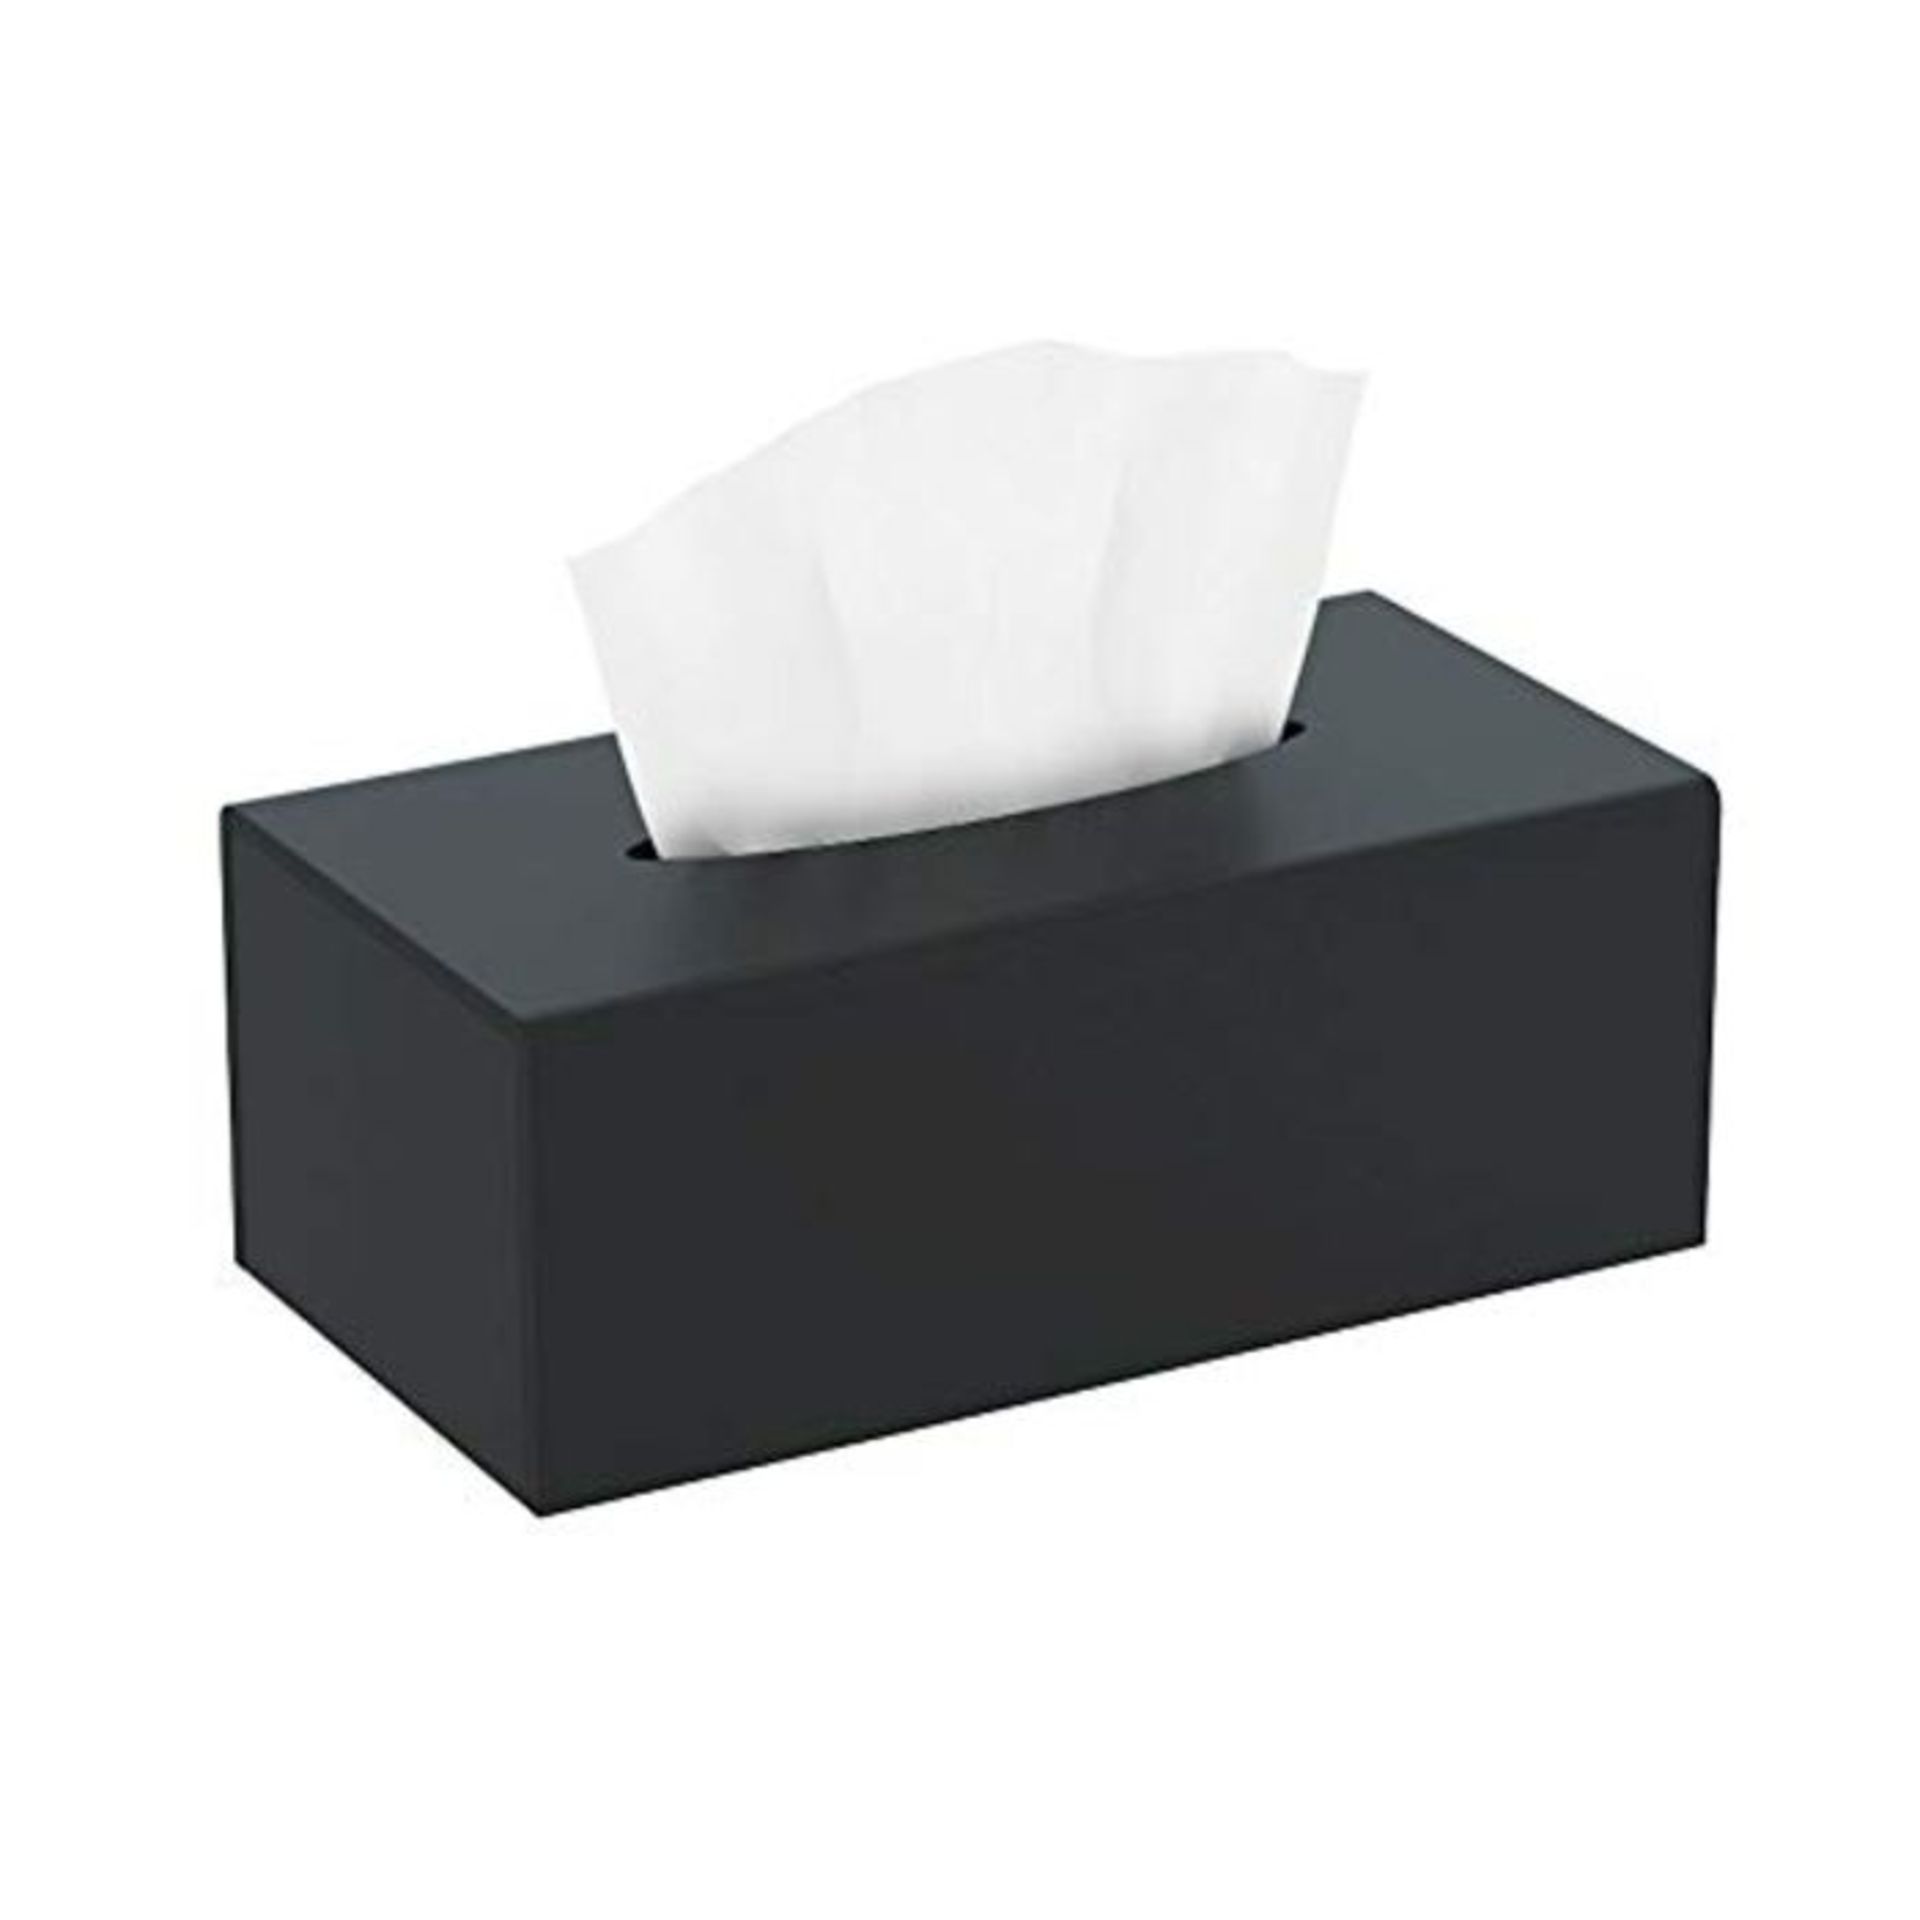 HIIMIEI Cosmetic Tissue Box, 25.0 x 13.0 x 9.0 cm, Acrylic Tissue Box with Magnetic Co